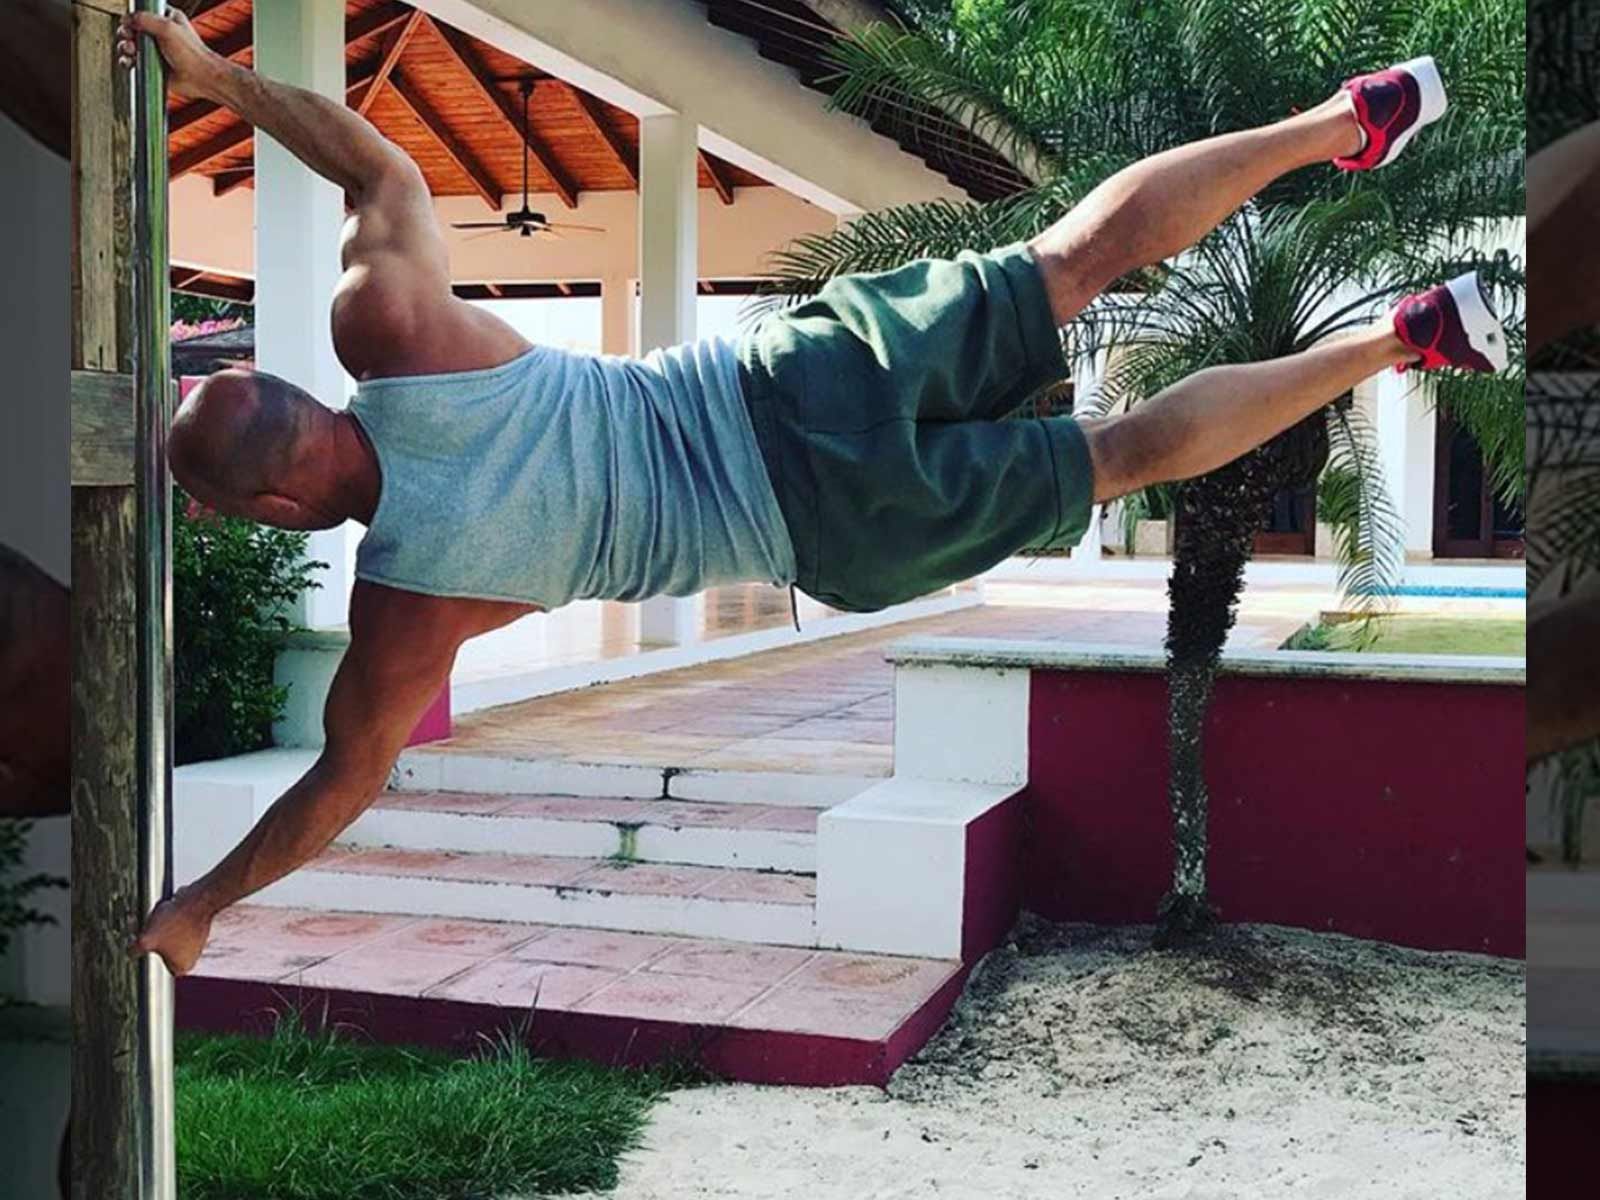 Vin Diesel Shows Super Human Strength While Training for 'Bloodshot'